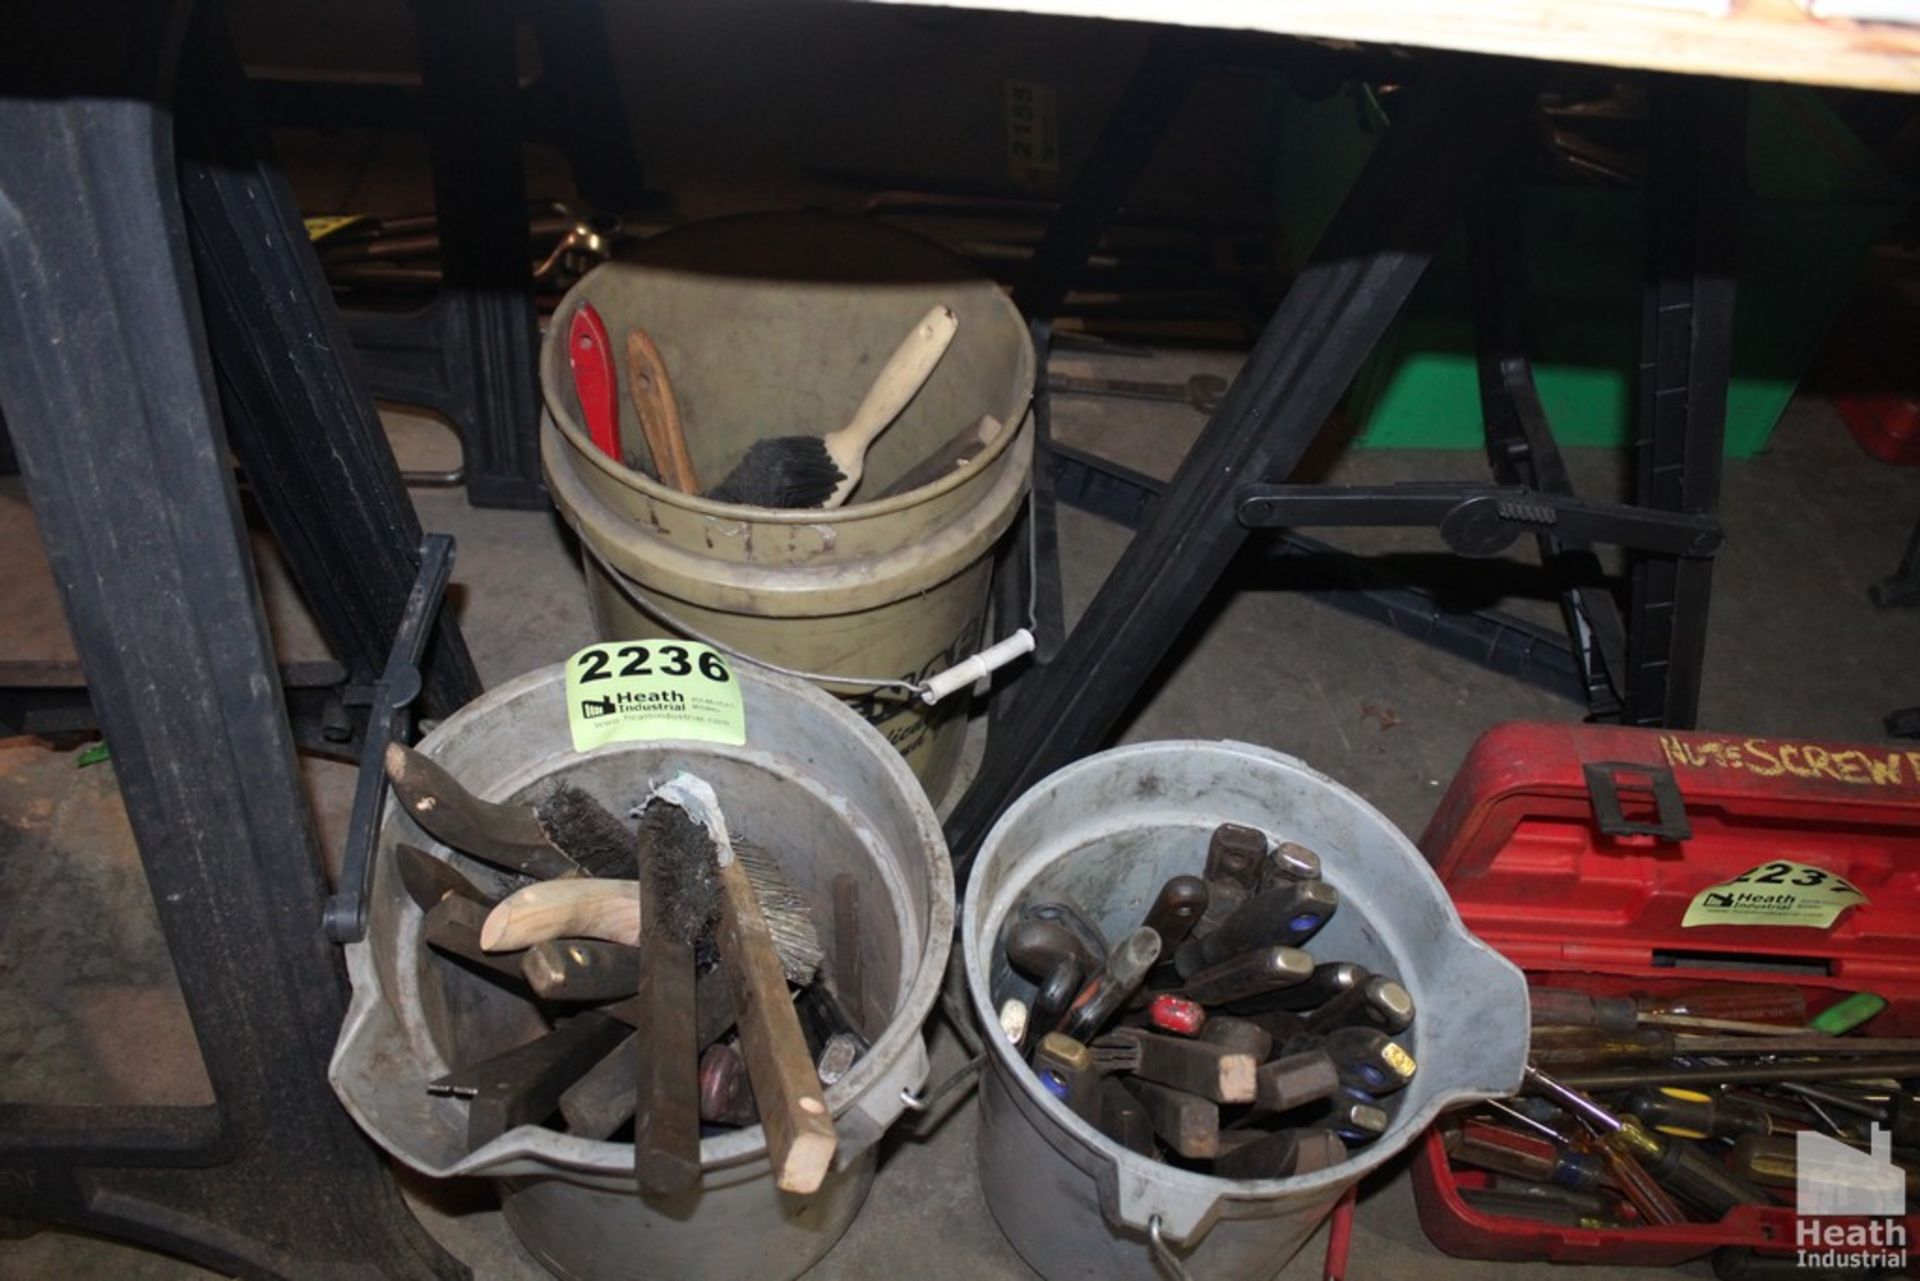 WIRE BRUSHES AND SCRAPERS IN TWO PAILS